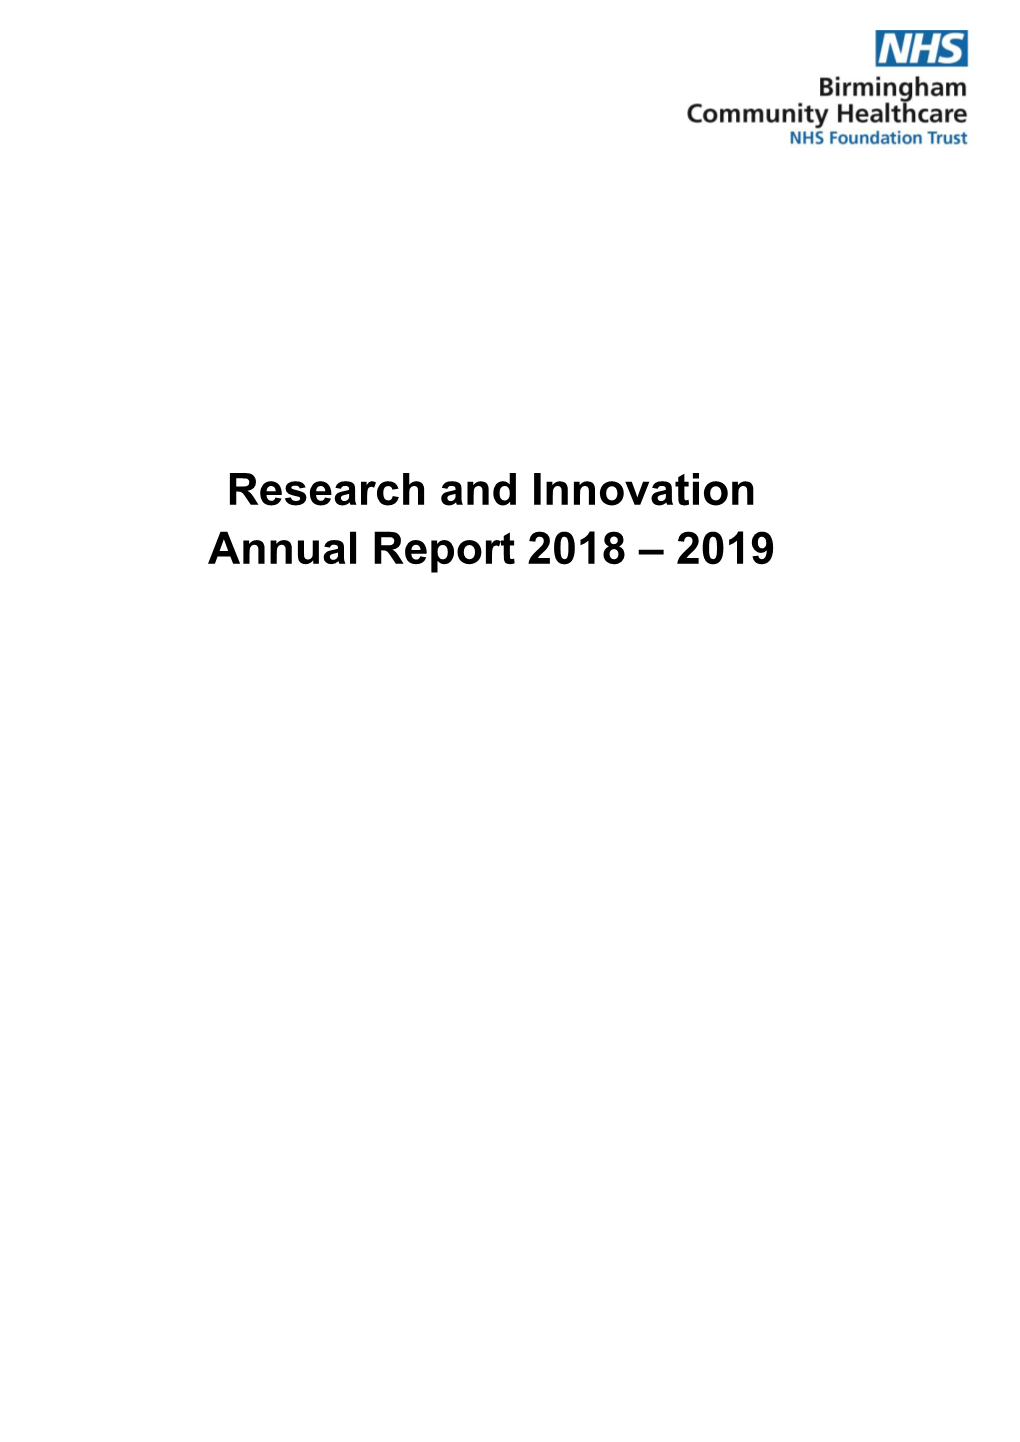 Research and Innovation Annual Report 2018 – 2019